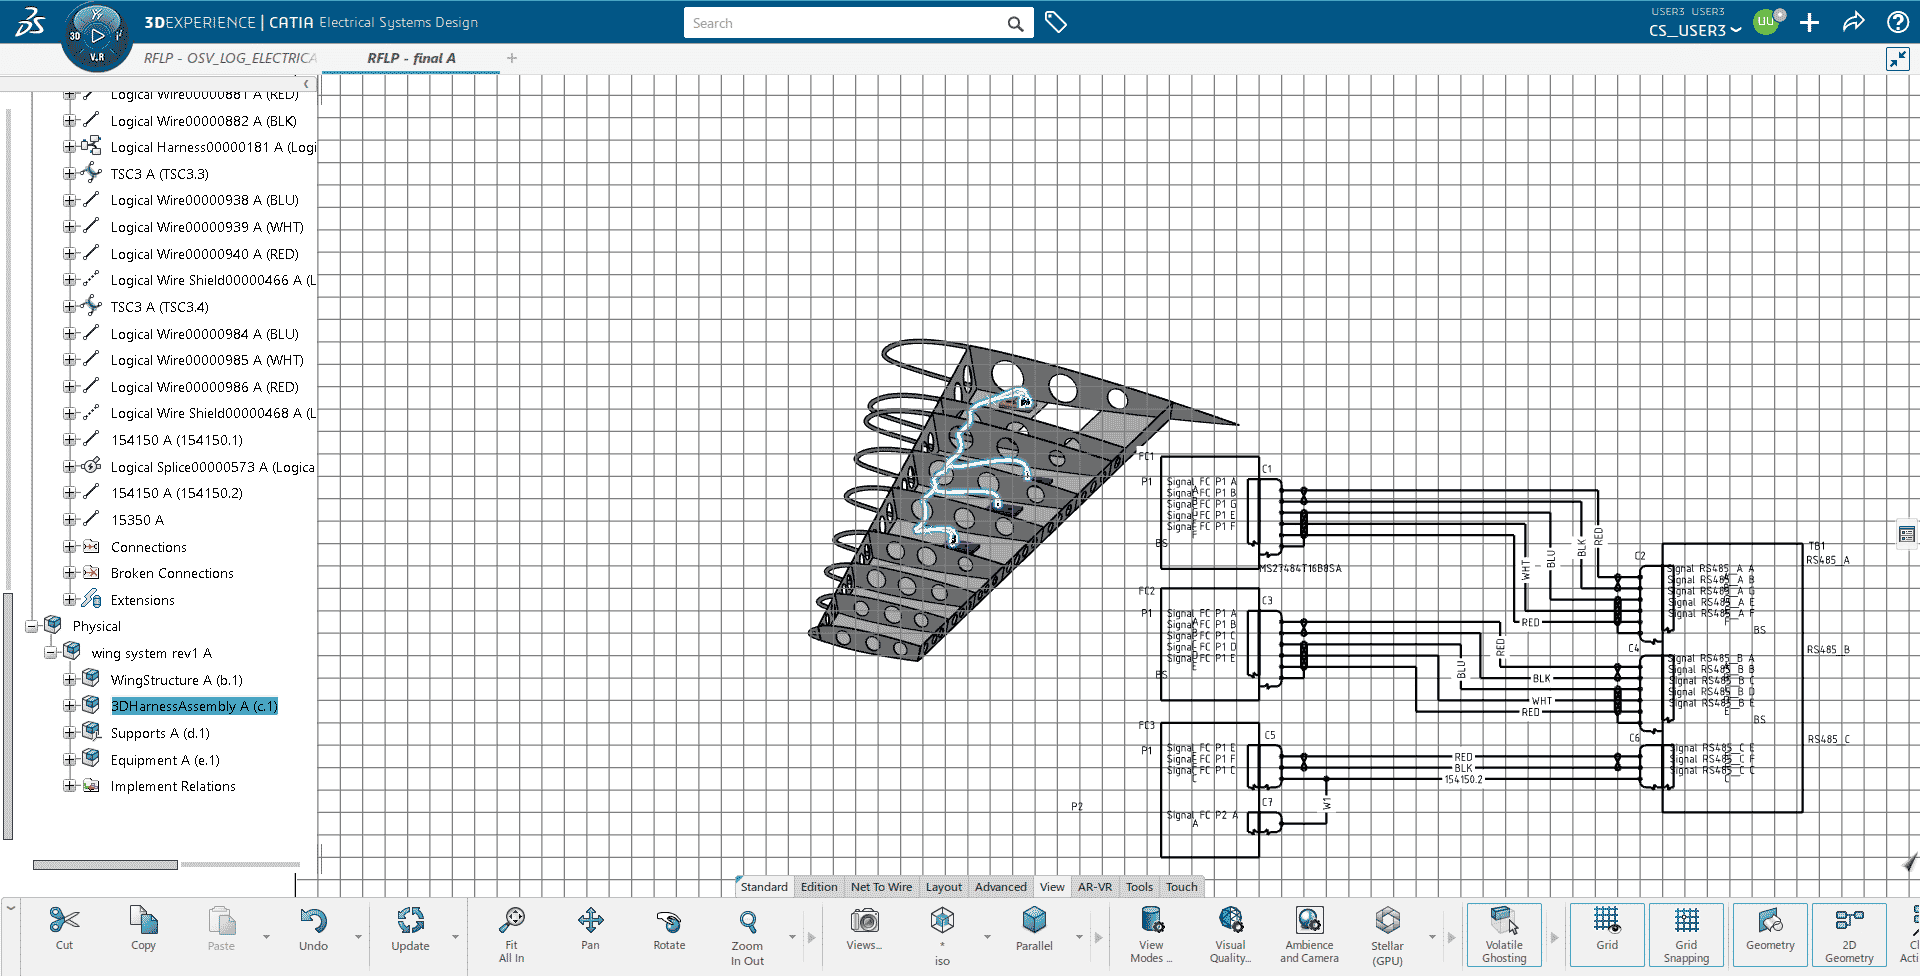 CATIA V6 Electrical 3D design requires the electrical 3d systems designer role.